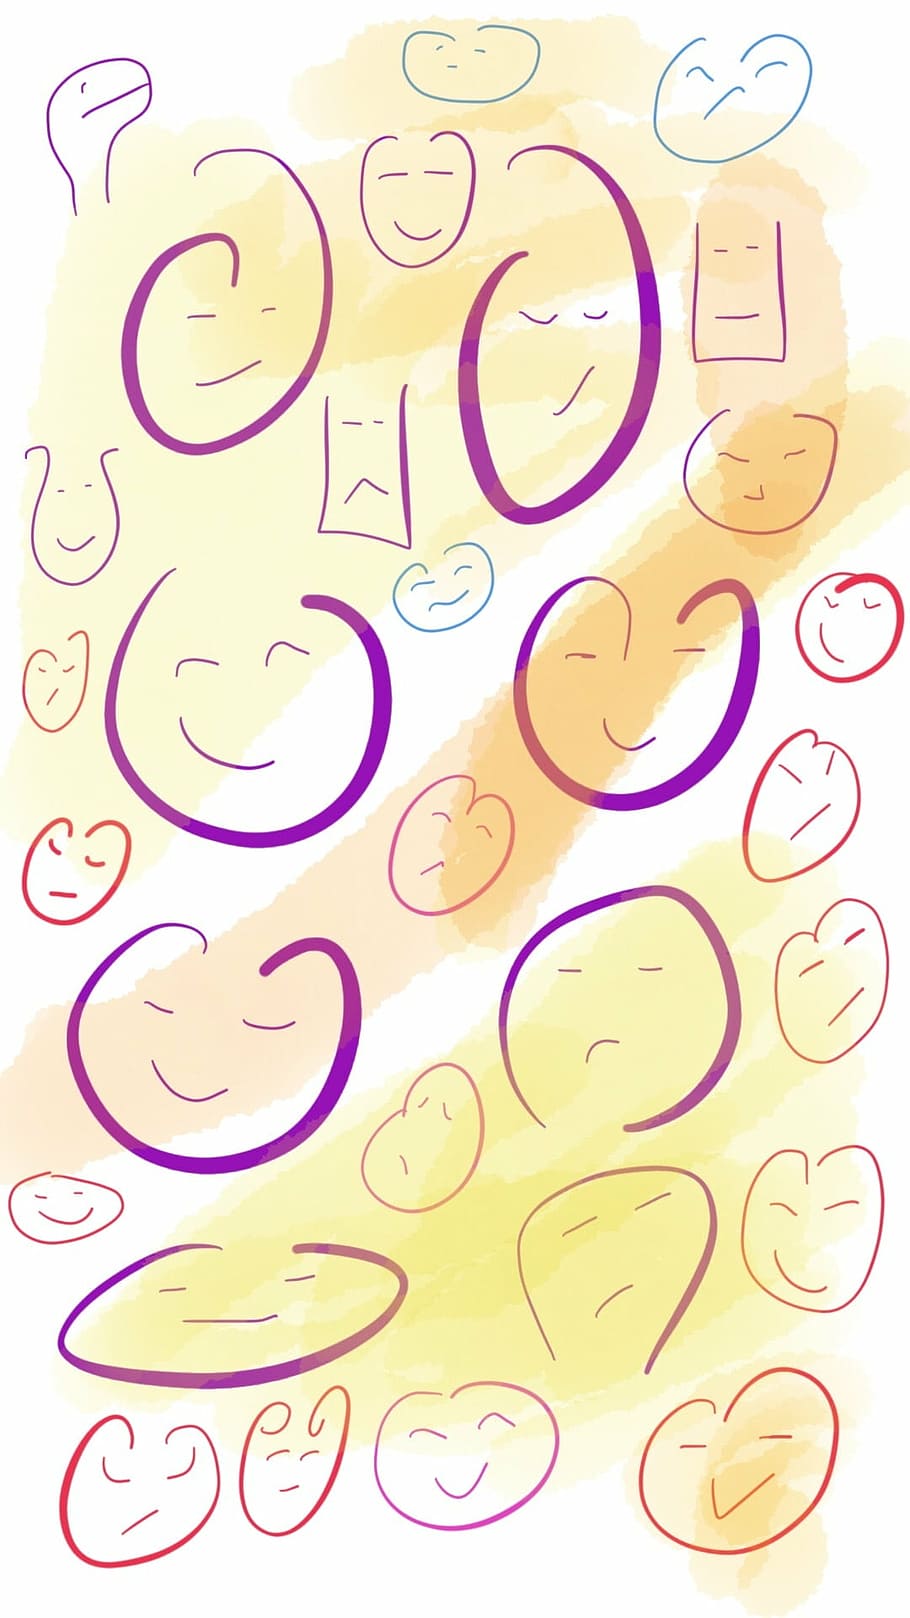 emoji illustration, faces, emotions, abstract, gesture, yellow